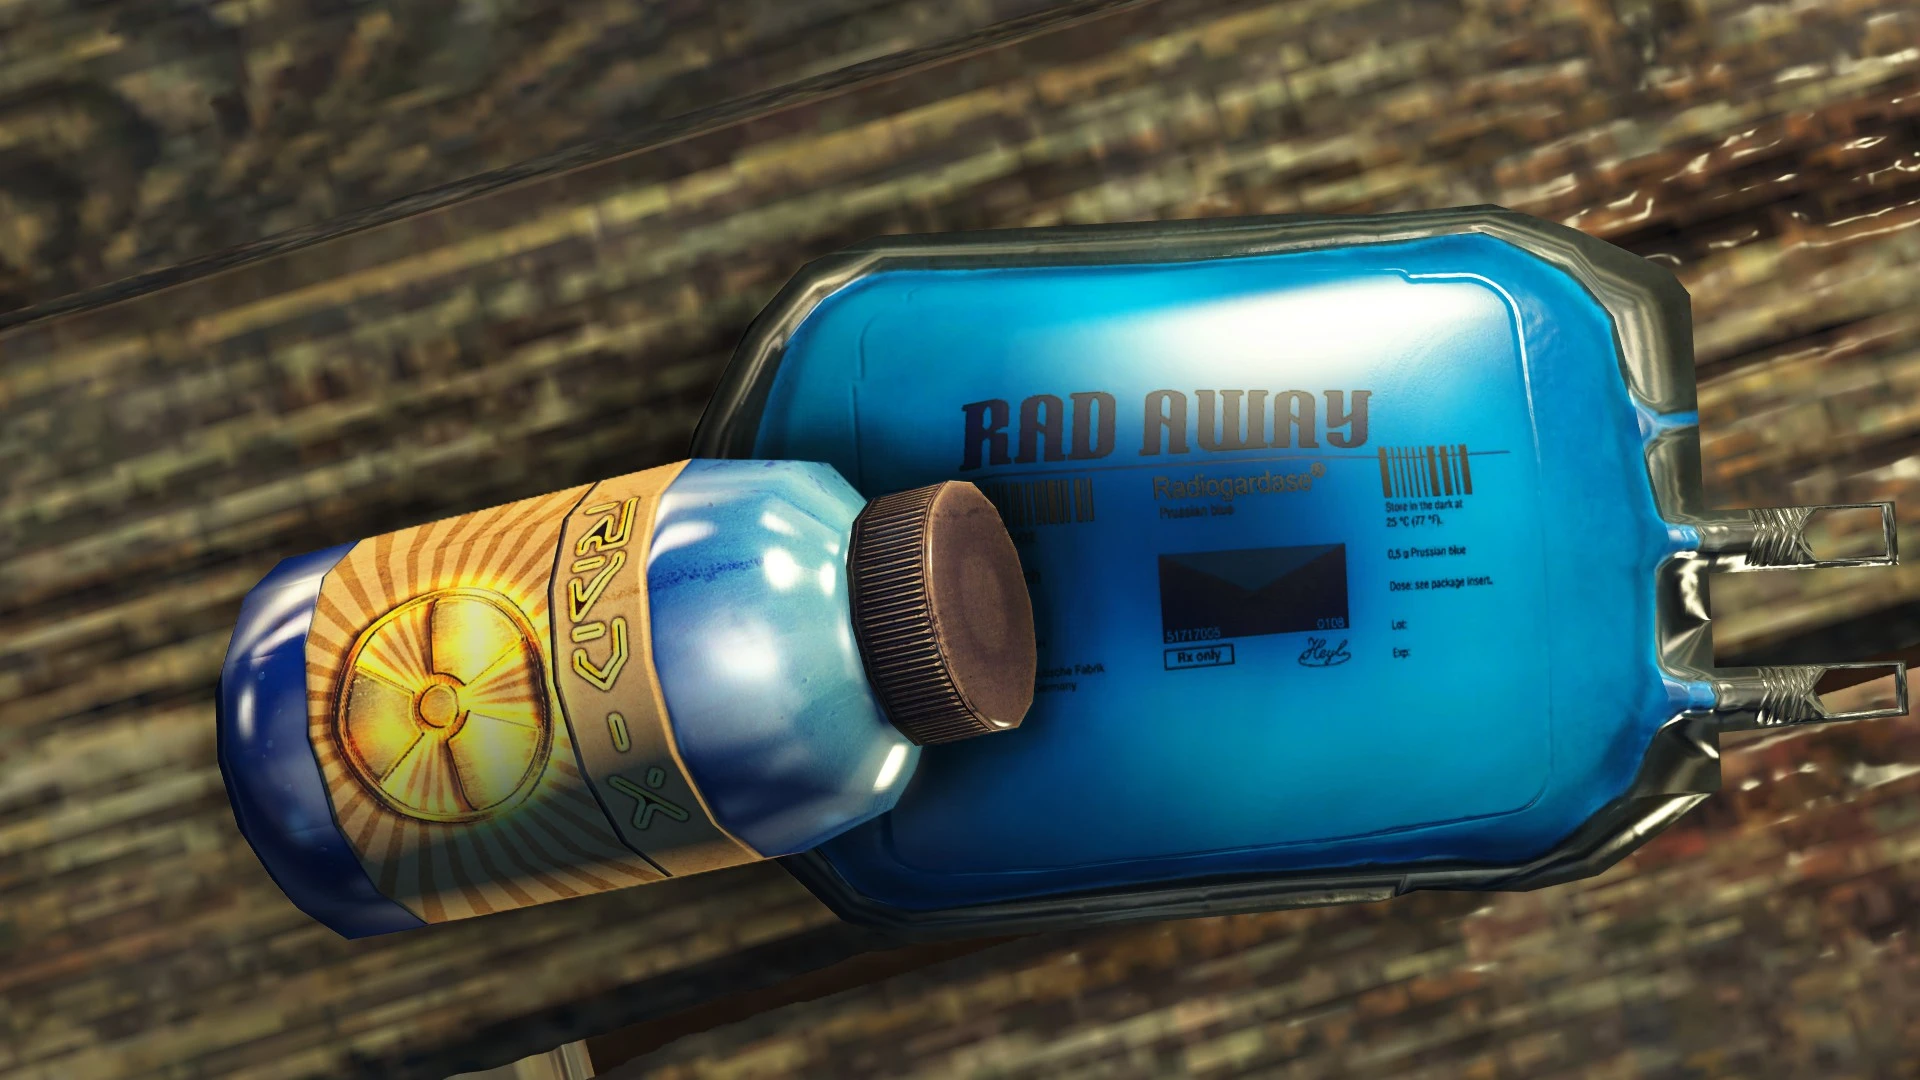 GD Radaway and RadX at Fallout 4 Nexus Mods and community